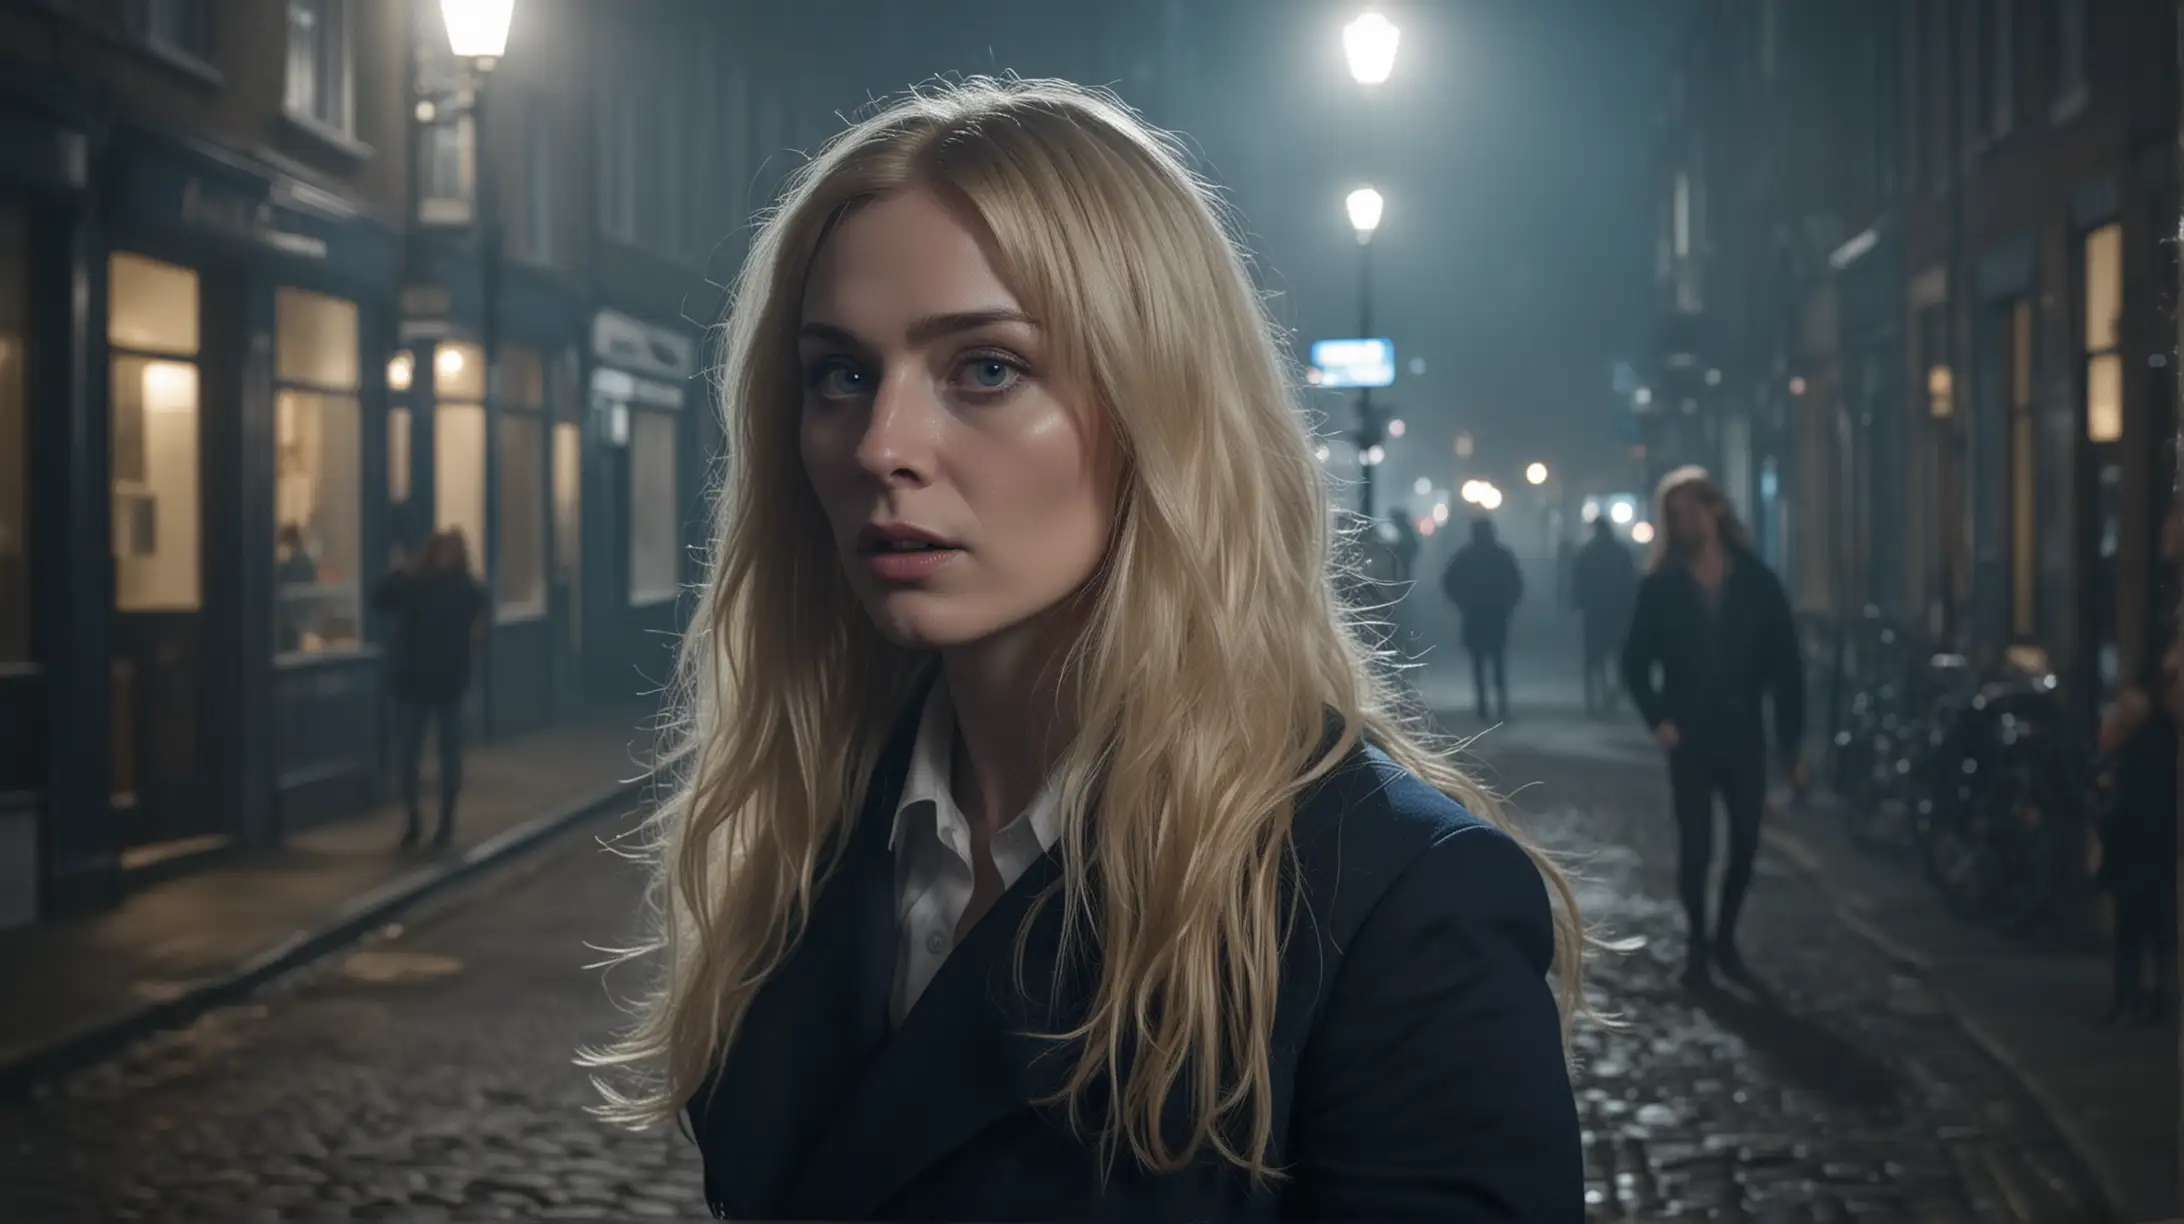 Create a cinematic image of a middle aged man face in the shadows talking to an 18 girl is standing seductively on a foggy deserted street corner at night in old London. Wearing a Long Blond hair wig, blue eyes, cherub face. Provocatively dressed, flicking a cigarette to the ground, looks like Jessica Barden  Atmosphere is a sense of eerie mystery. Photo realistic. 